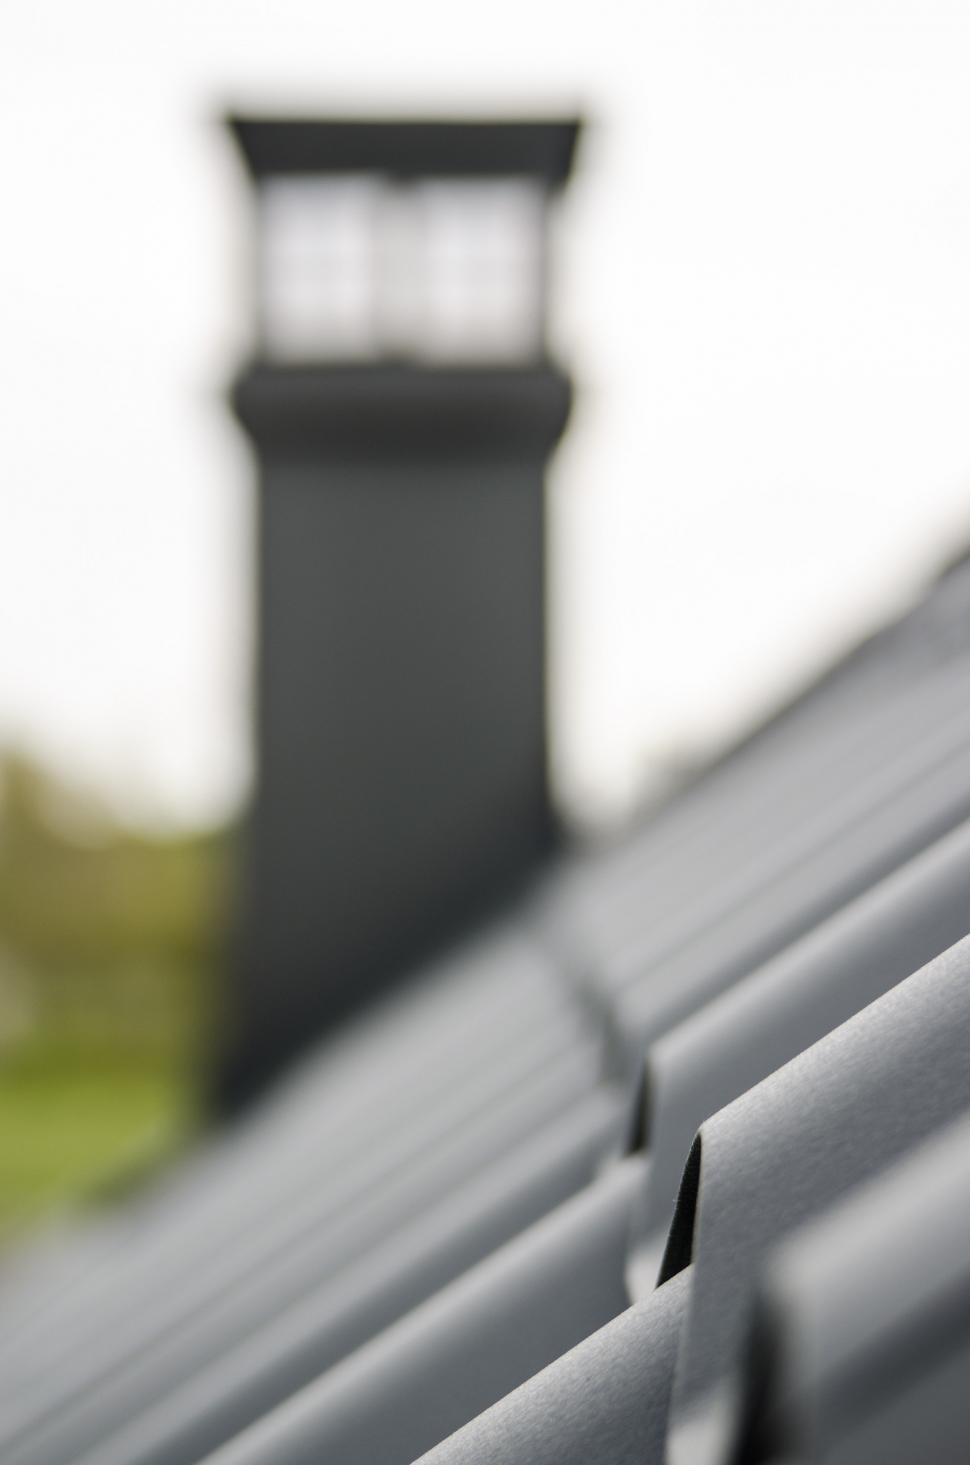 Free Image of Metal Roof Close Up With Clock Tower in Background 